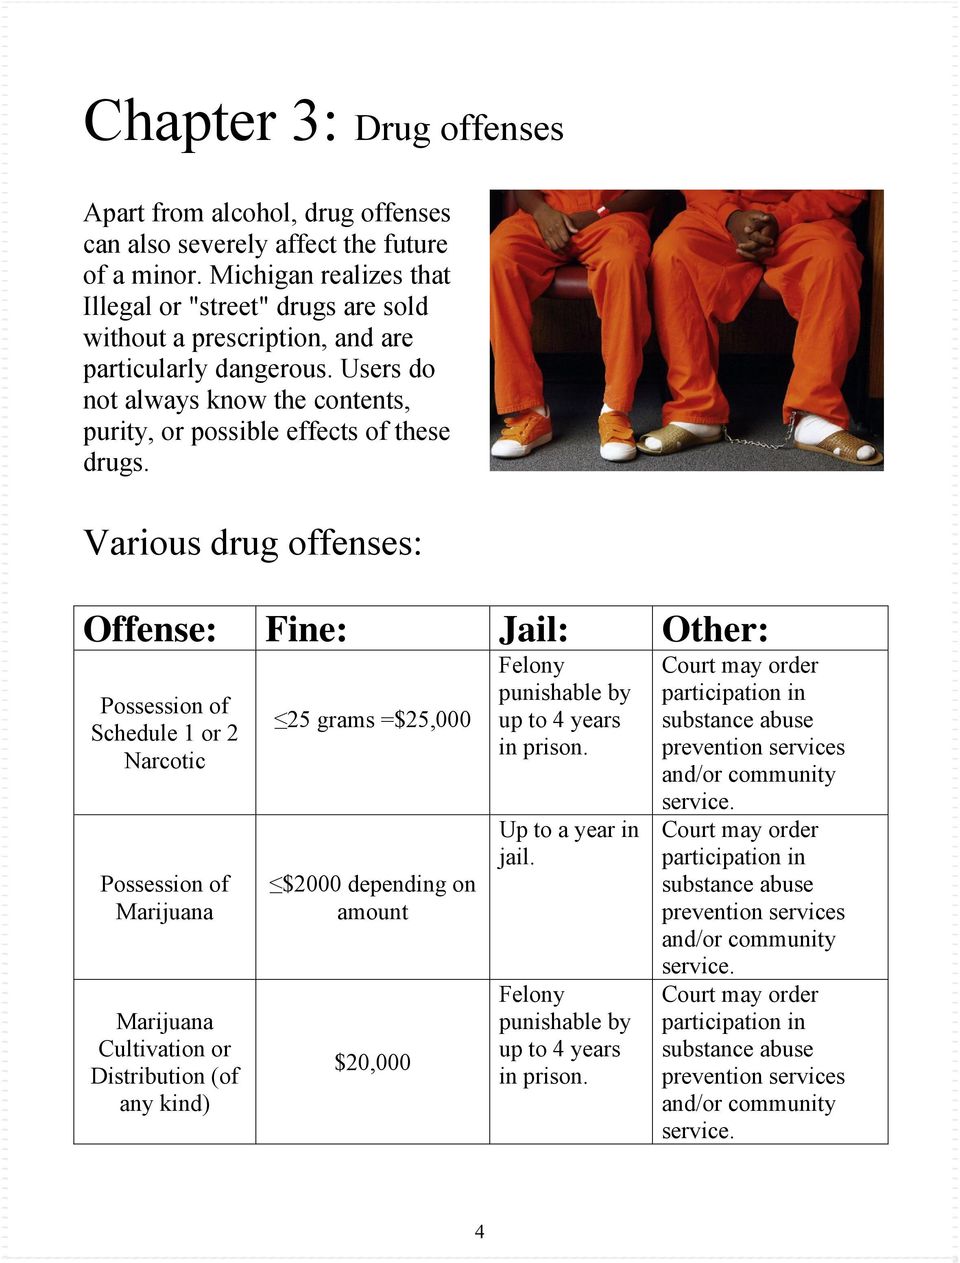 Various drug offenses: Offense: Fine: Jail: Other: Possession of Schedule 1 or 2 Narcotic Possession of Marijuana Marijuana Cultivation or Distribution (of any kind) 25 grams =$25,000 $2000 depending